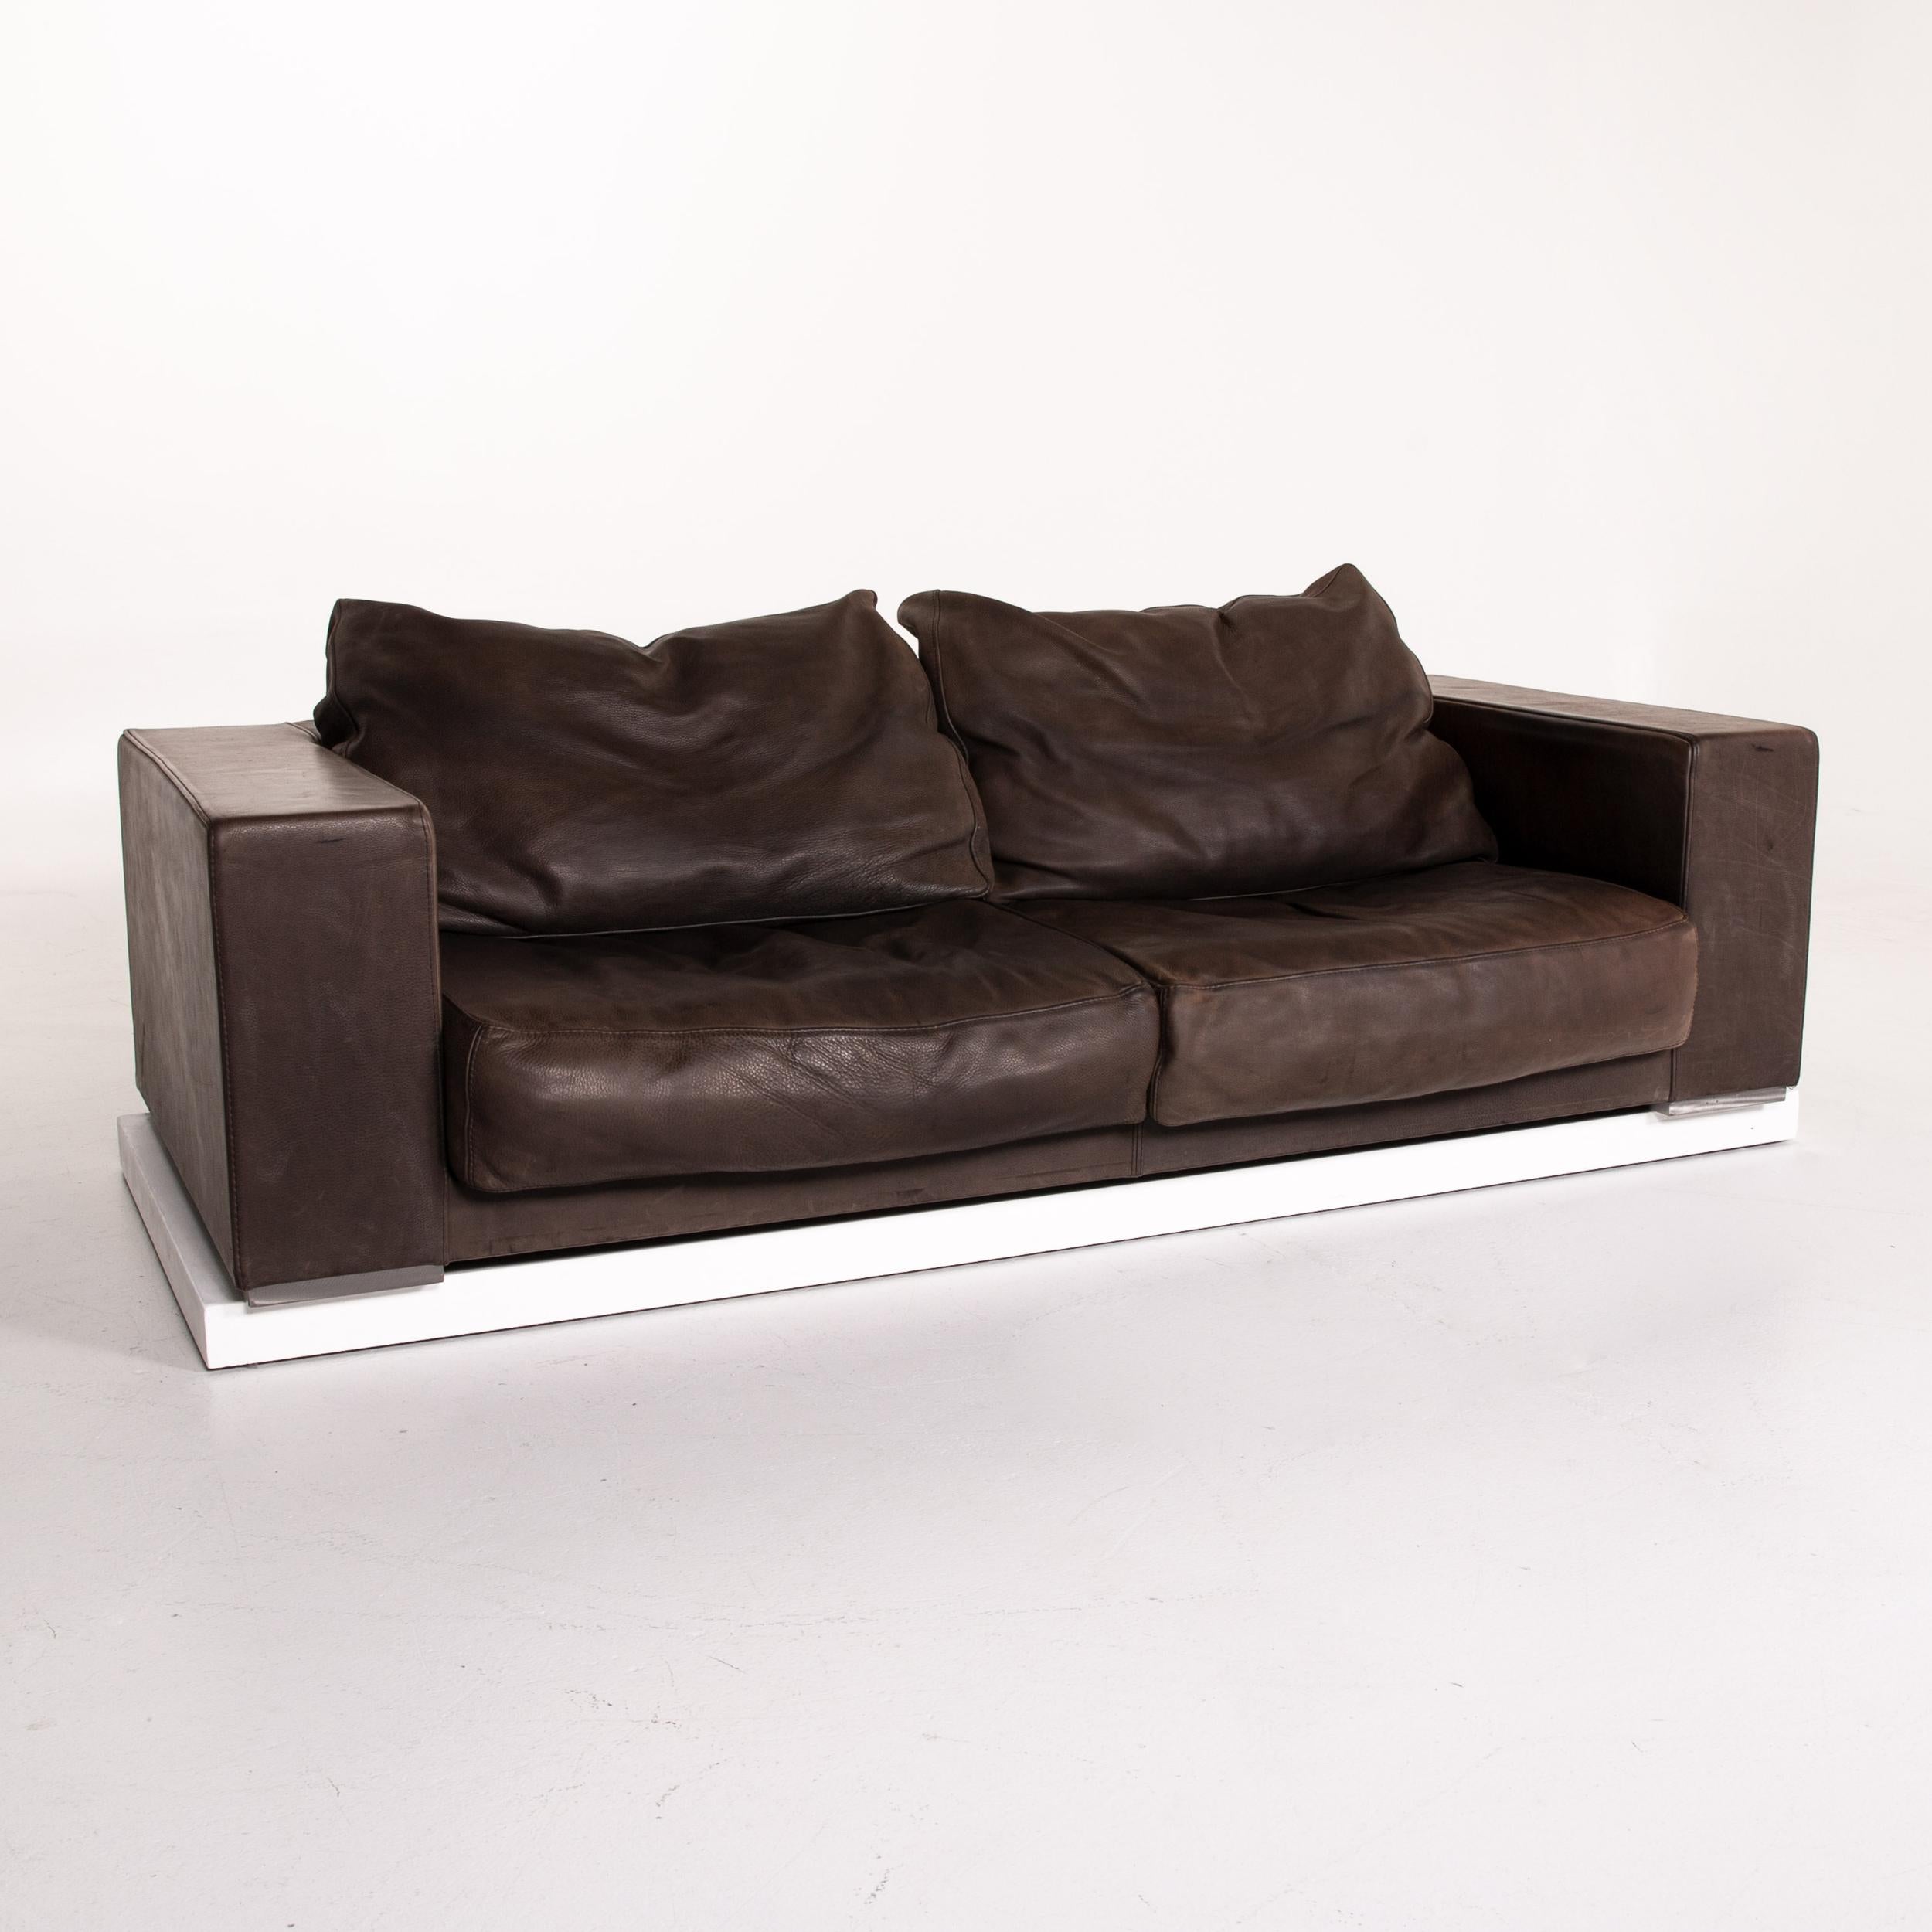 Contemporary Baxter Budapest Leather Sofa Brown Two-Seat Couch 14016 For Sale